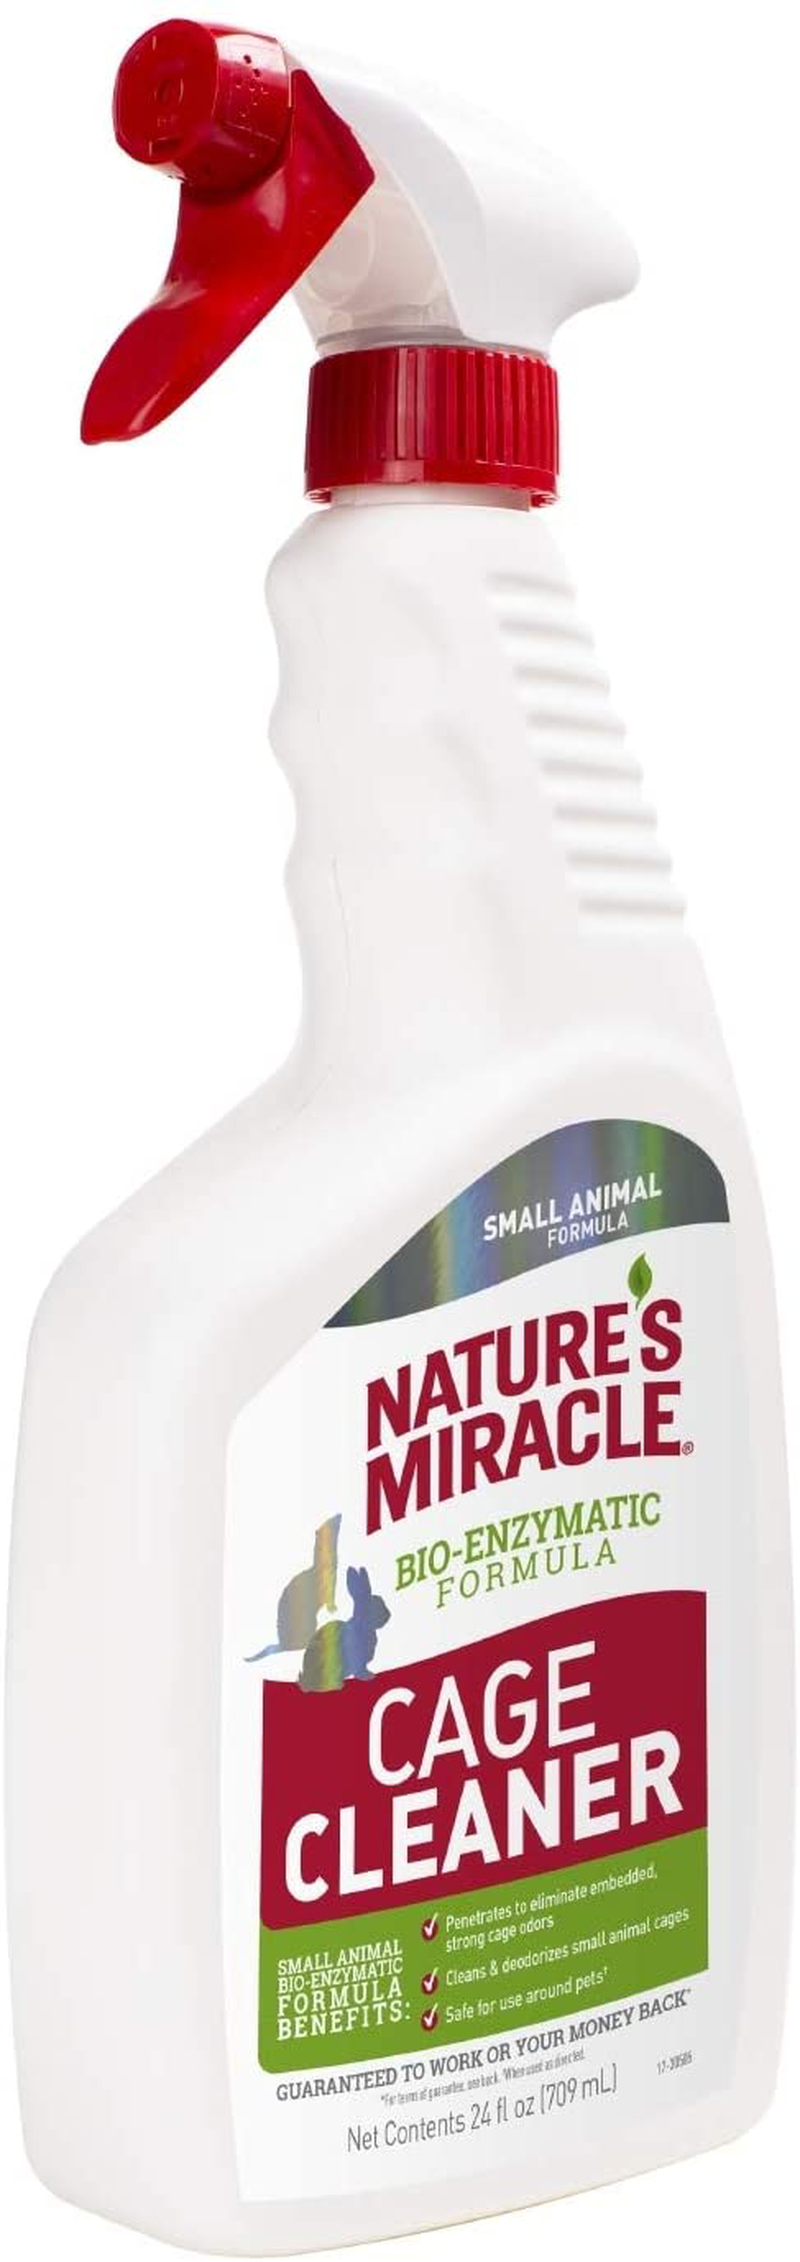 Nature’S Miracle Cage Cleaner 24 Fl Oz, Small Animal Formula, Cleans and Deodorizes Small Animal Cages, 2Nd Edition